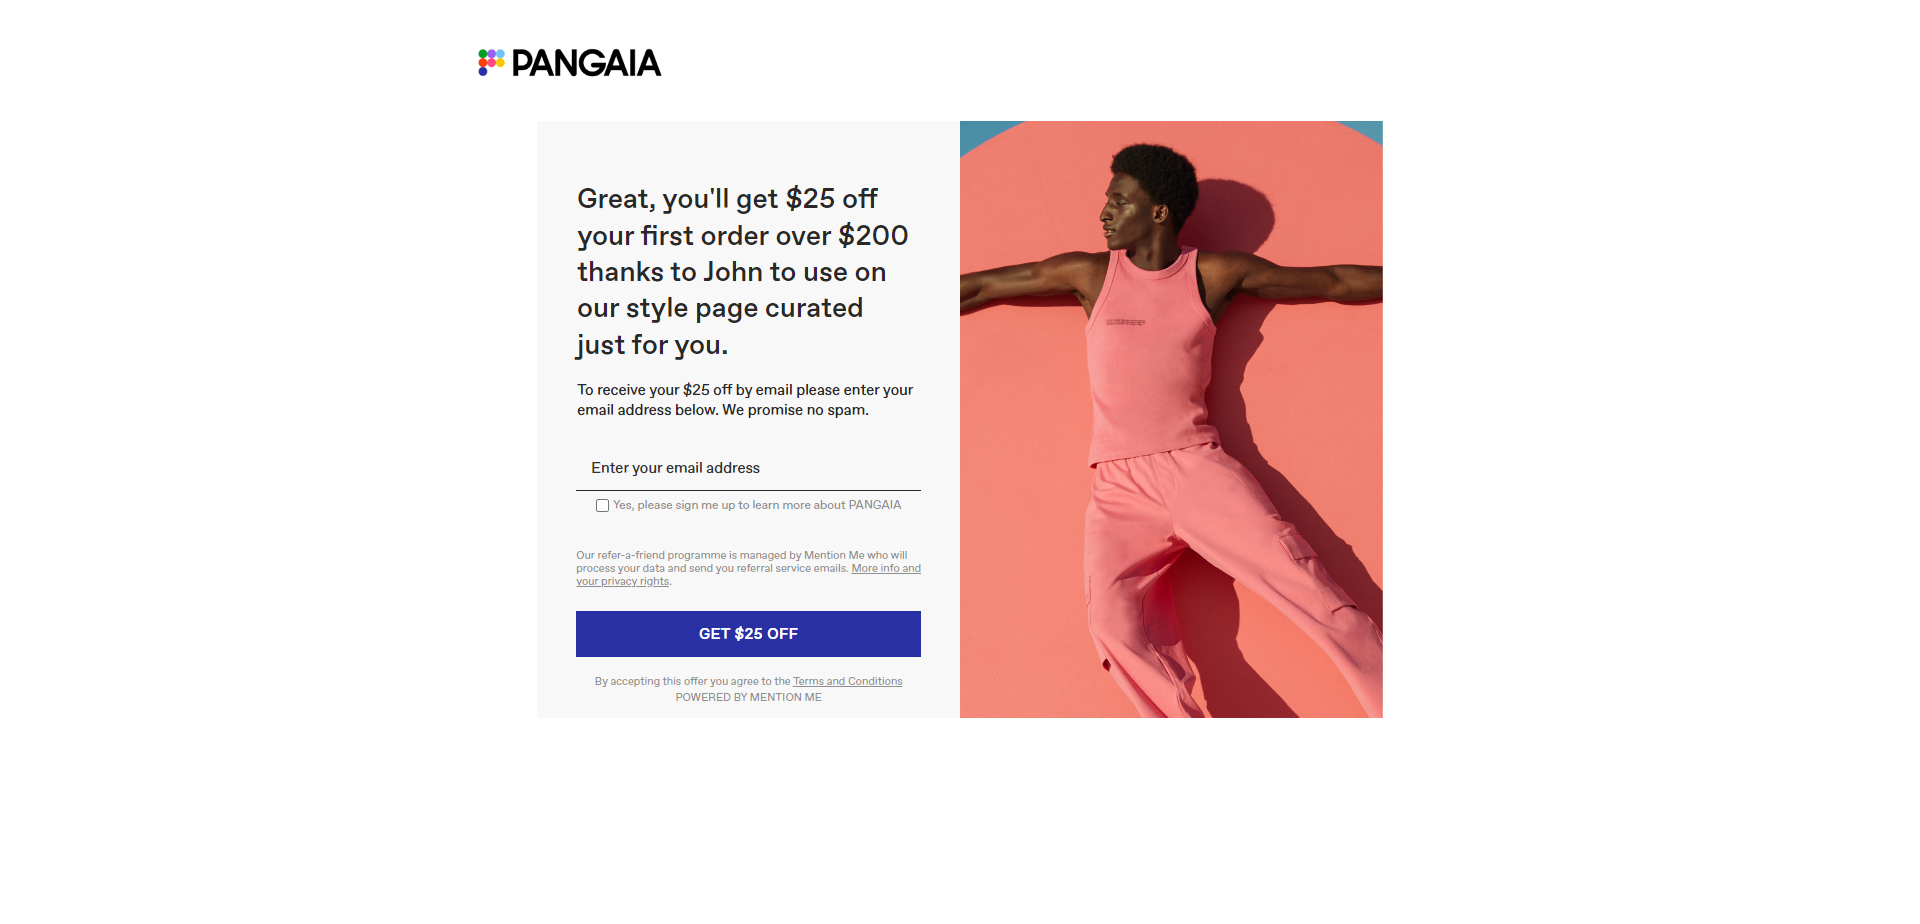 Referral Landing Page for The Pangaia